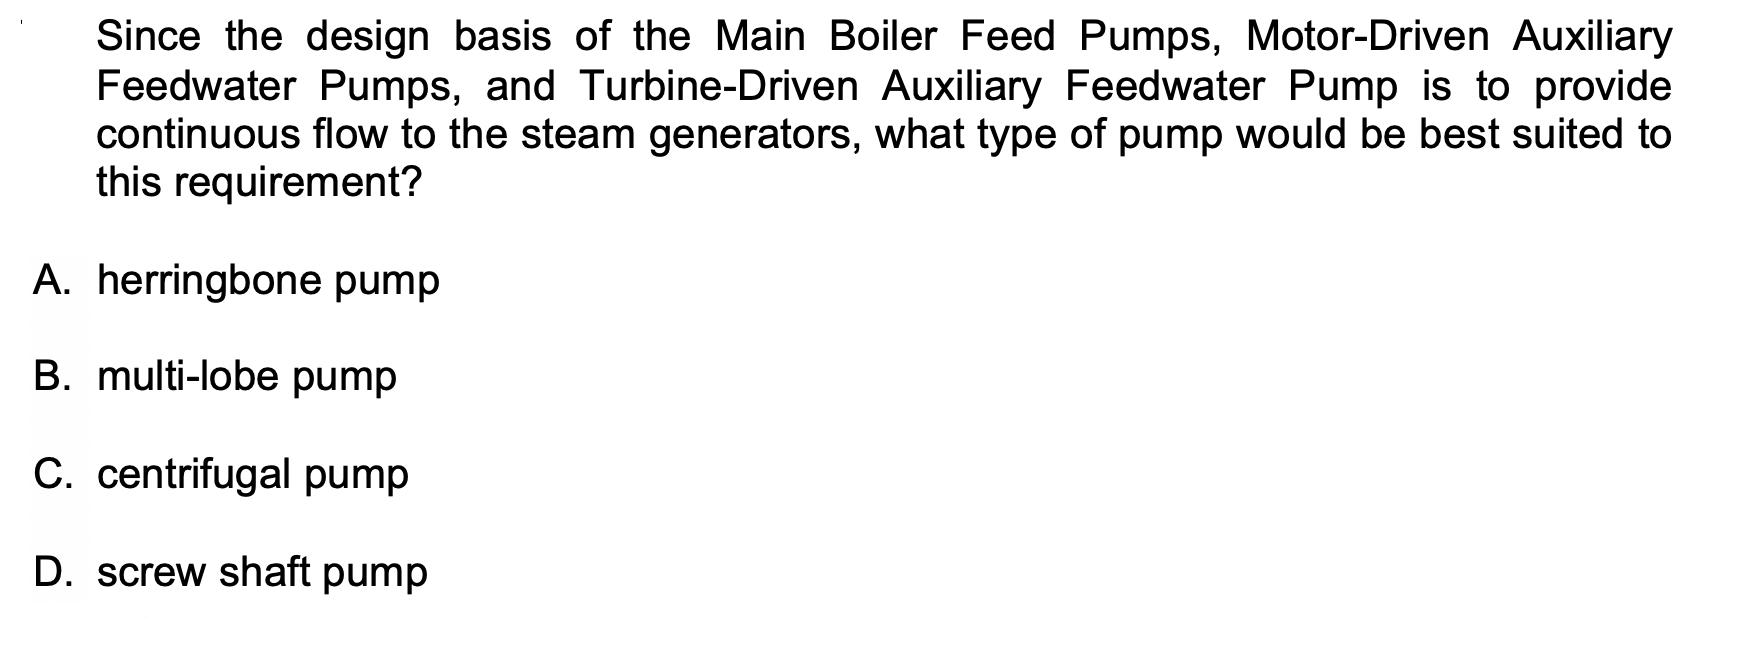 Since the design basis of the Main Boiler Feed Pumps, Motor-Driven Auxiliary Feedwater Pumps, and